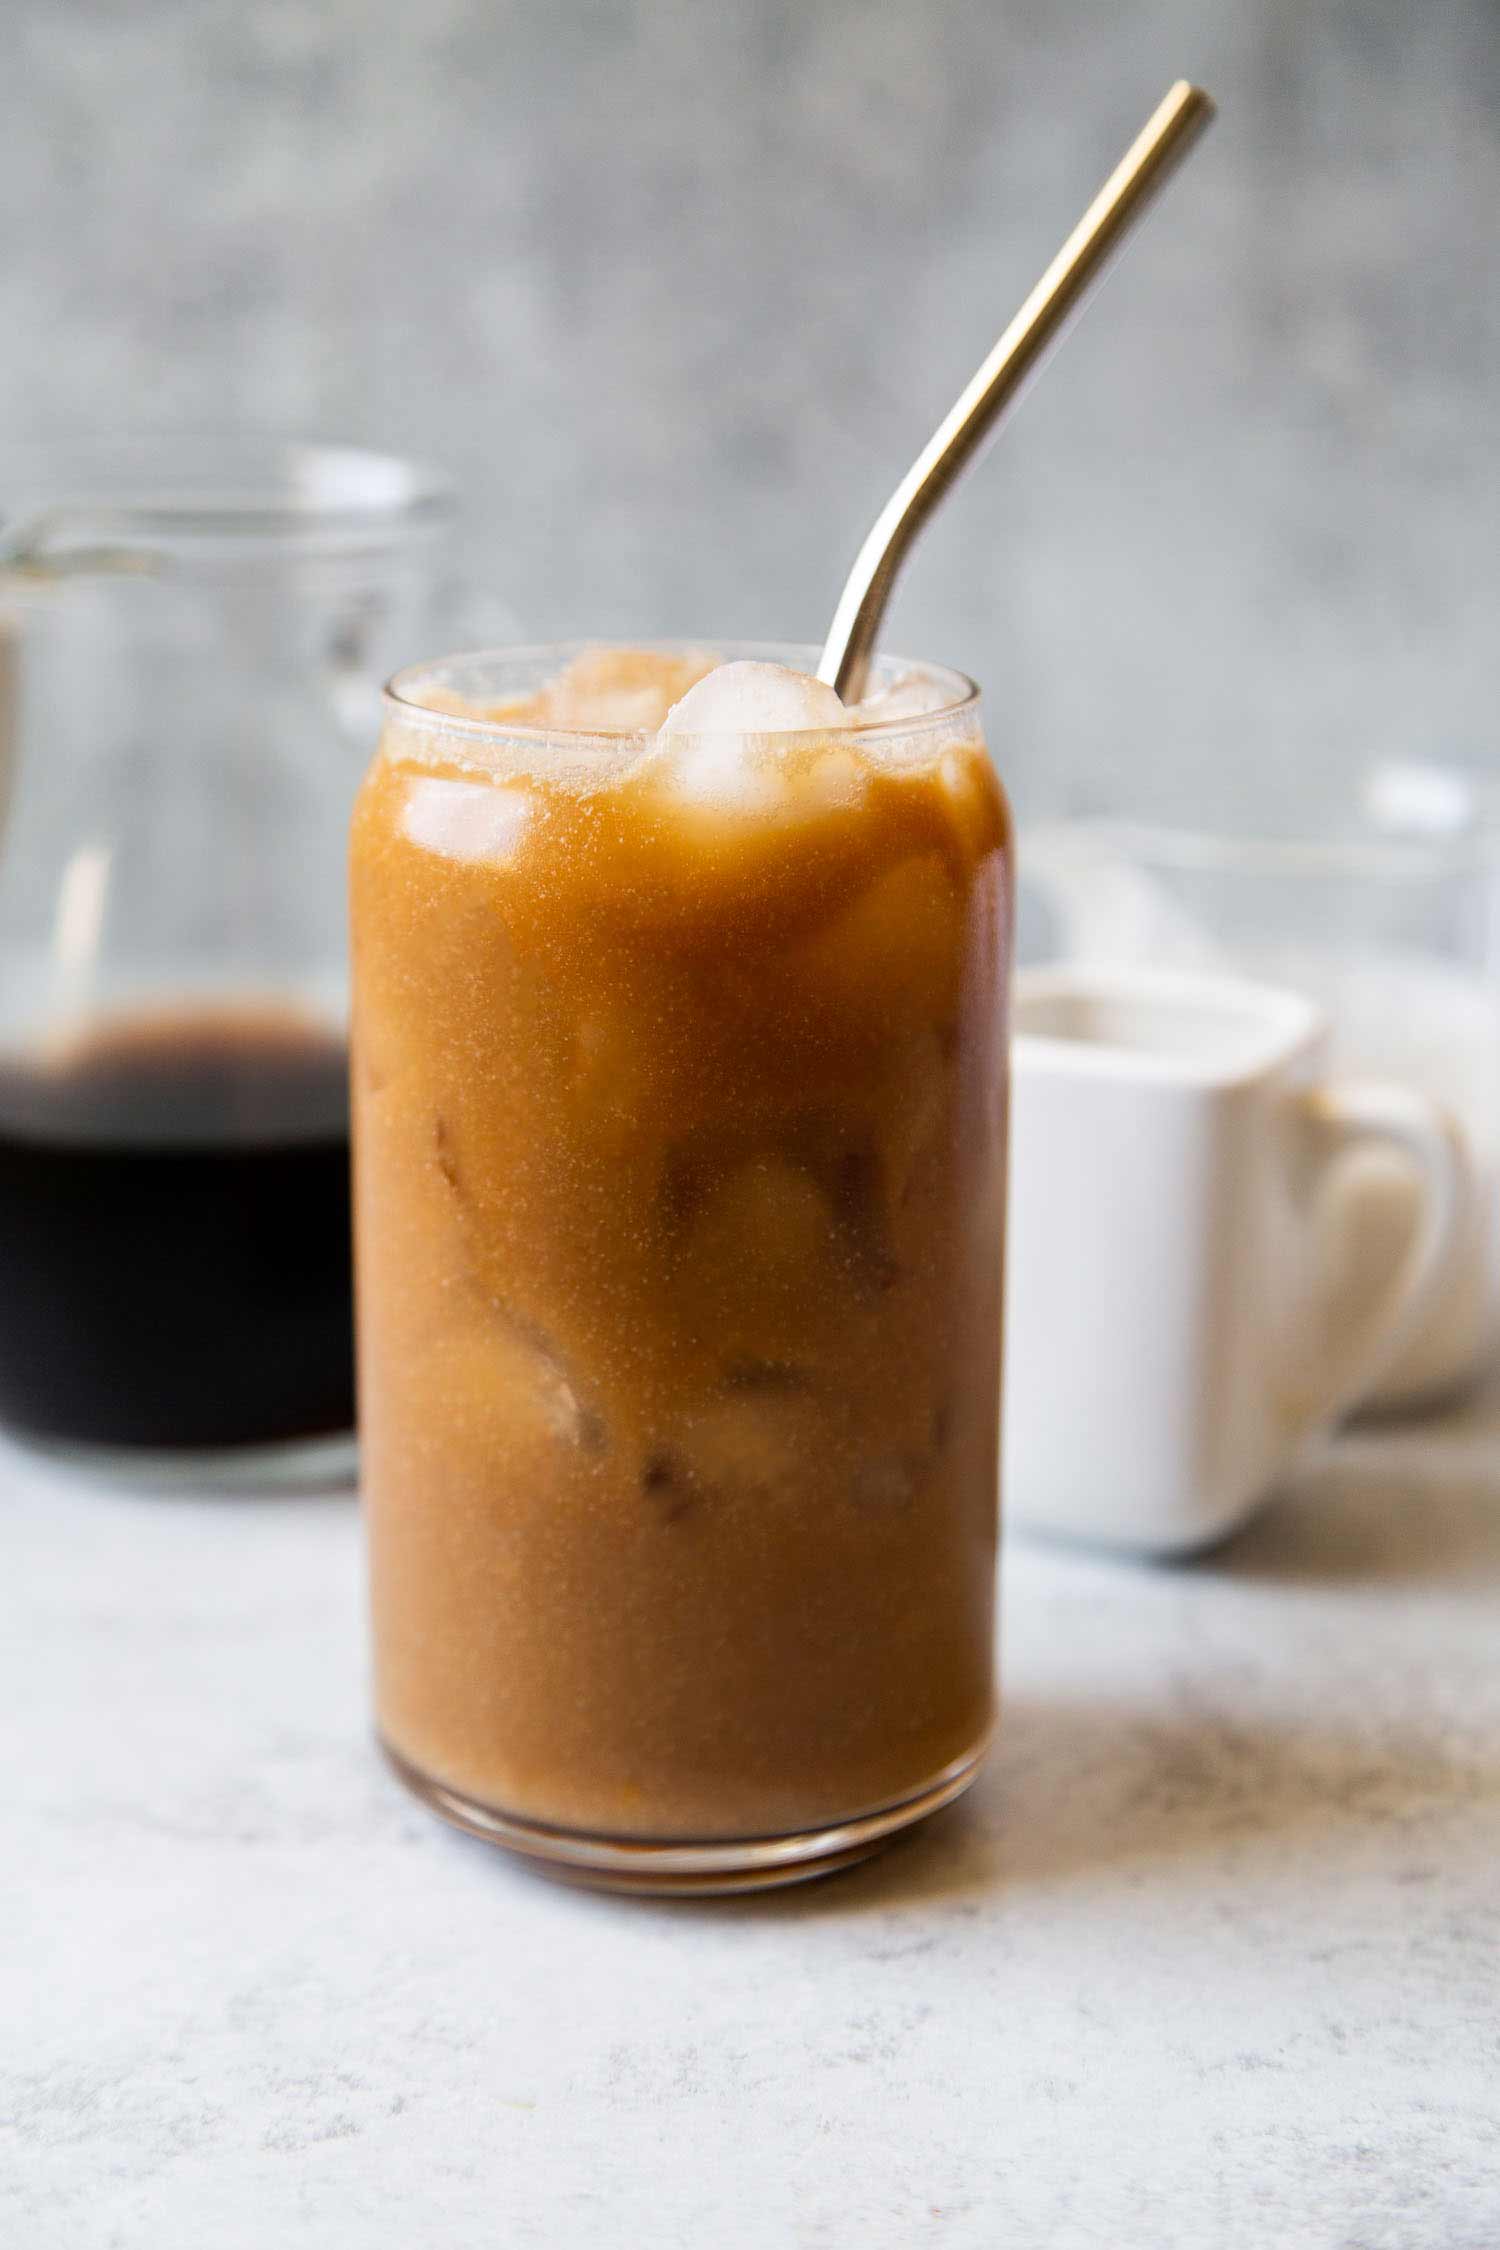 Make cold brew coffee at home using this easy overnight coffee recipe!